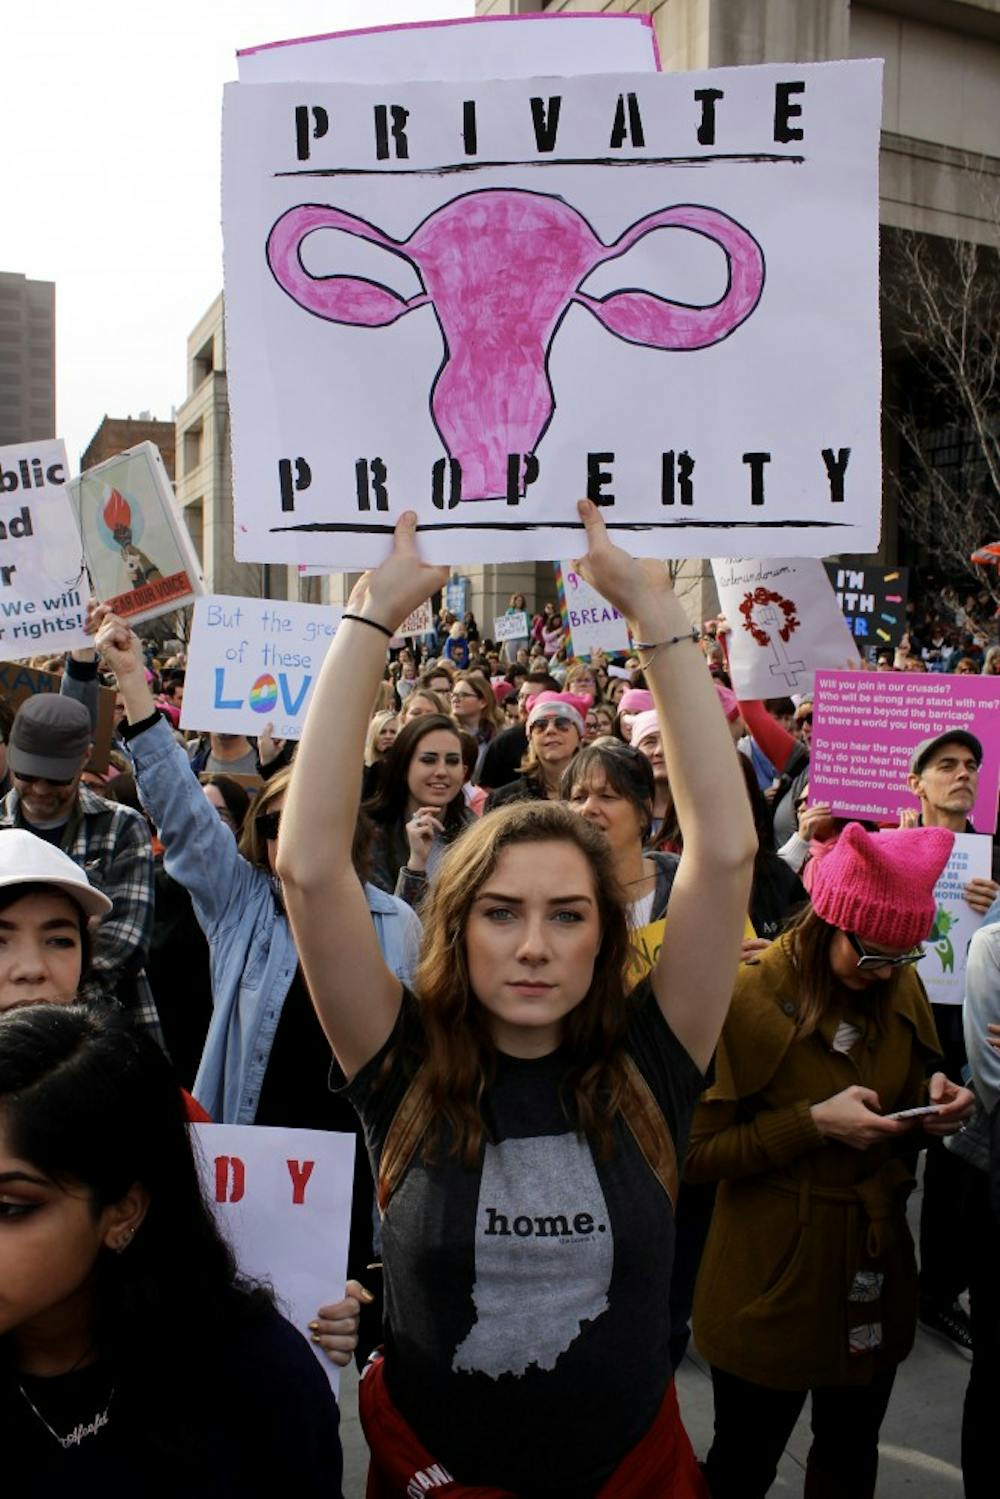 Moira Kehoe, an IU freshman, holds a sign during the Women's March on Jan. 20, 2017, in Indianapolis. There will be an anniversary march focused on voter registration Jan. 20 at the American Legion Mall in Indianapolis.&nbsp;